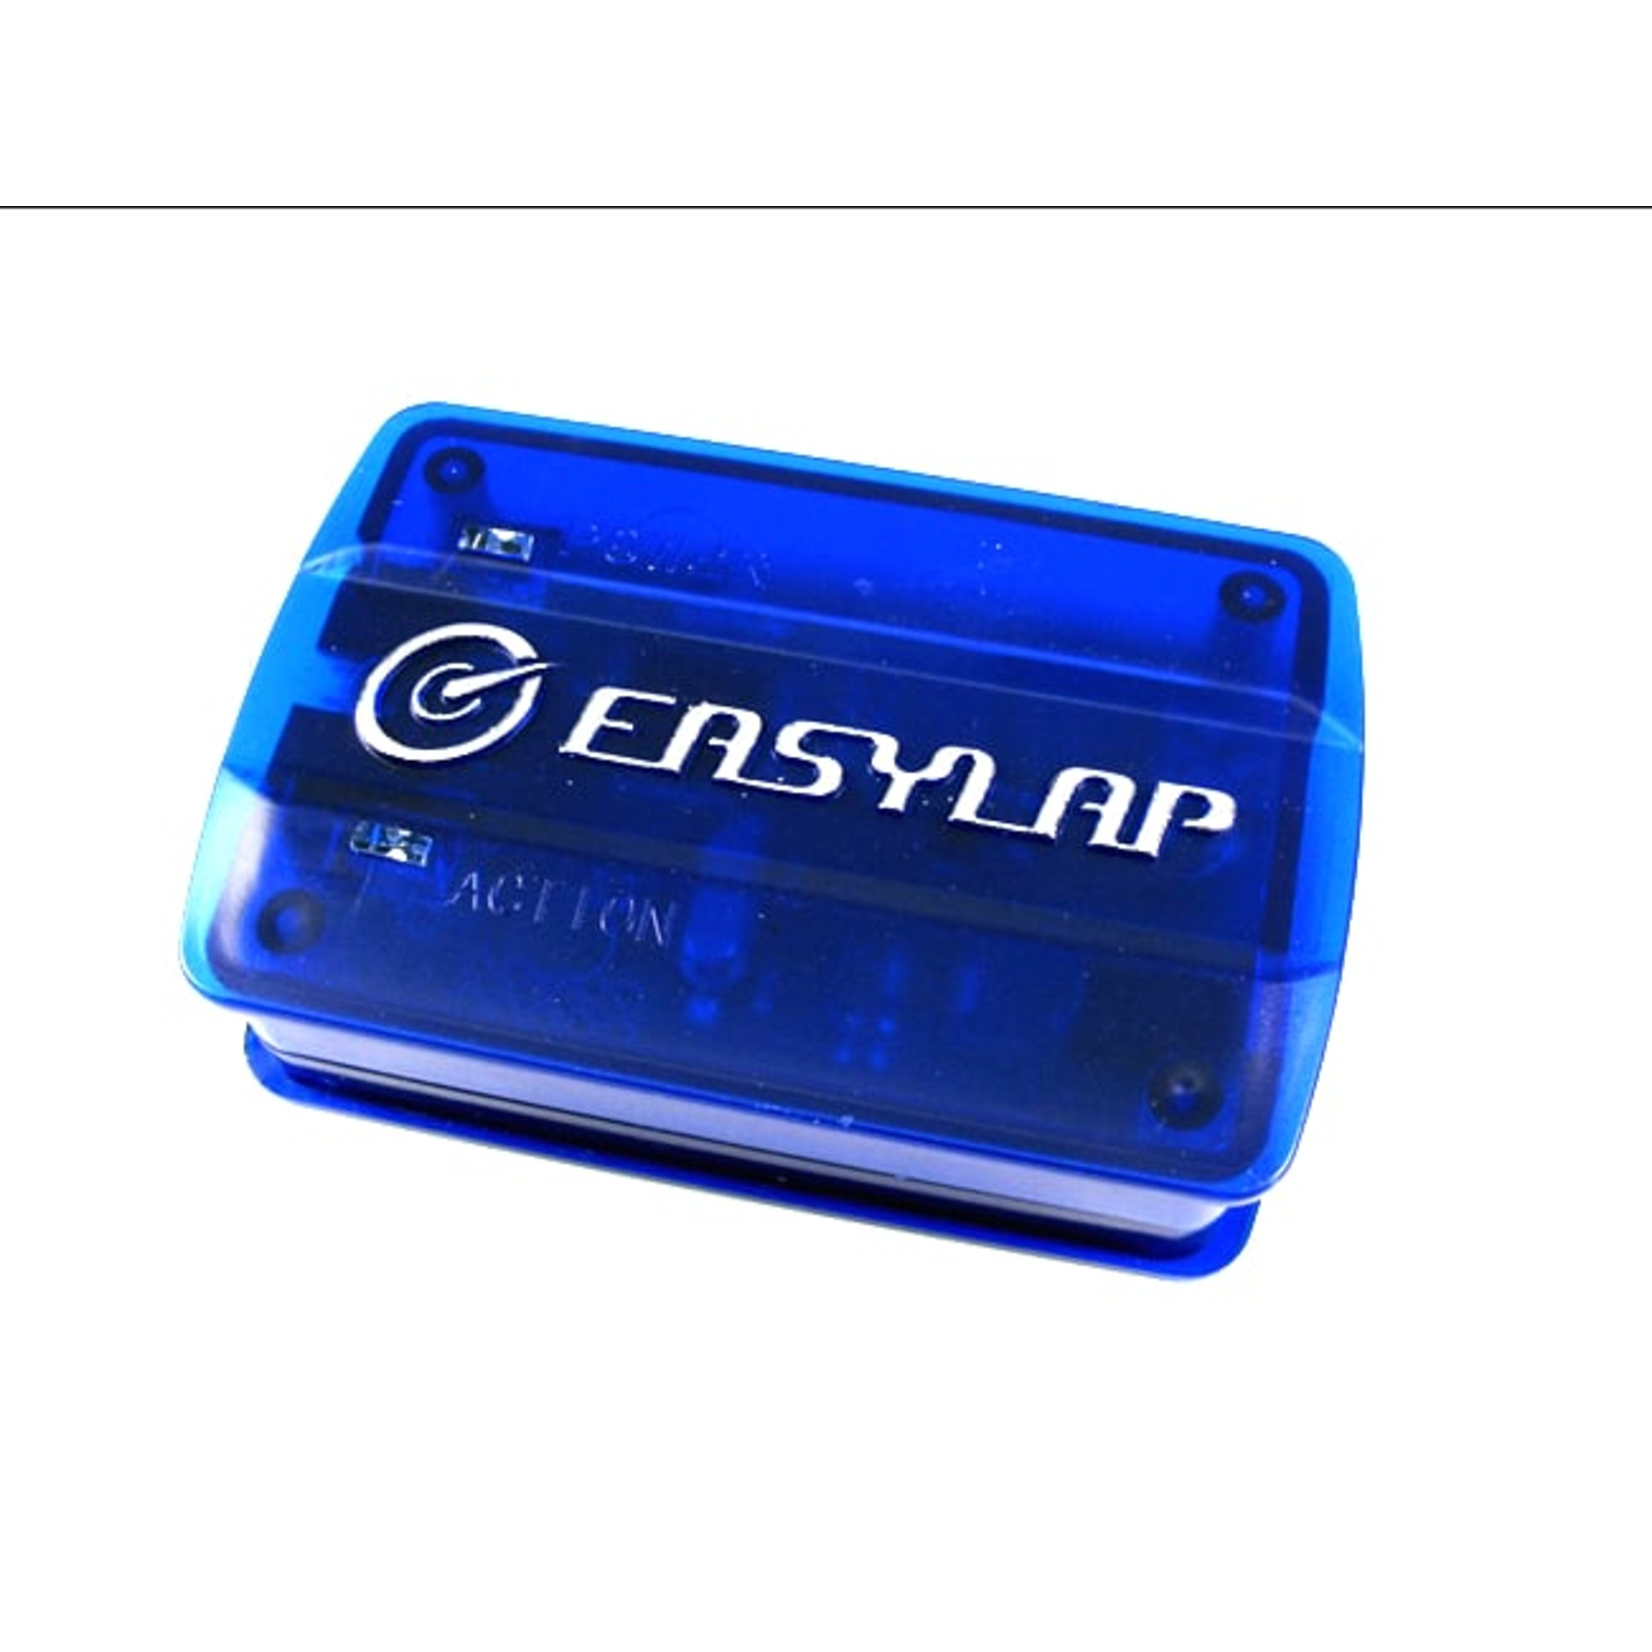 EASYLAP EASYLAP USB Digital Lap Timing System (Compatible with Robitronic) #EZL01